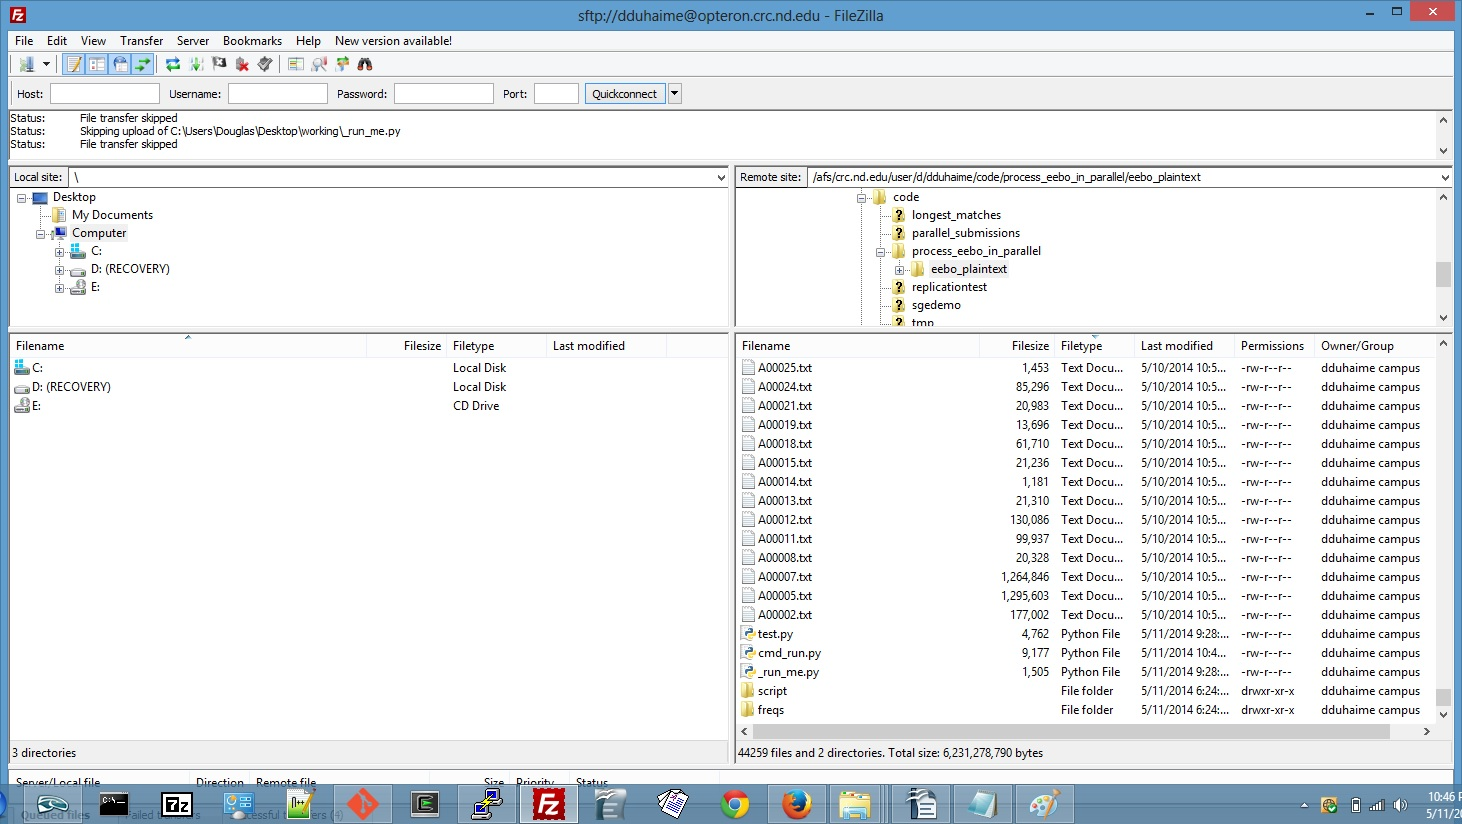 Screenshot showing all files required for batch processing on SGE.